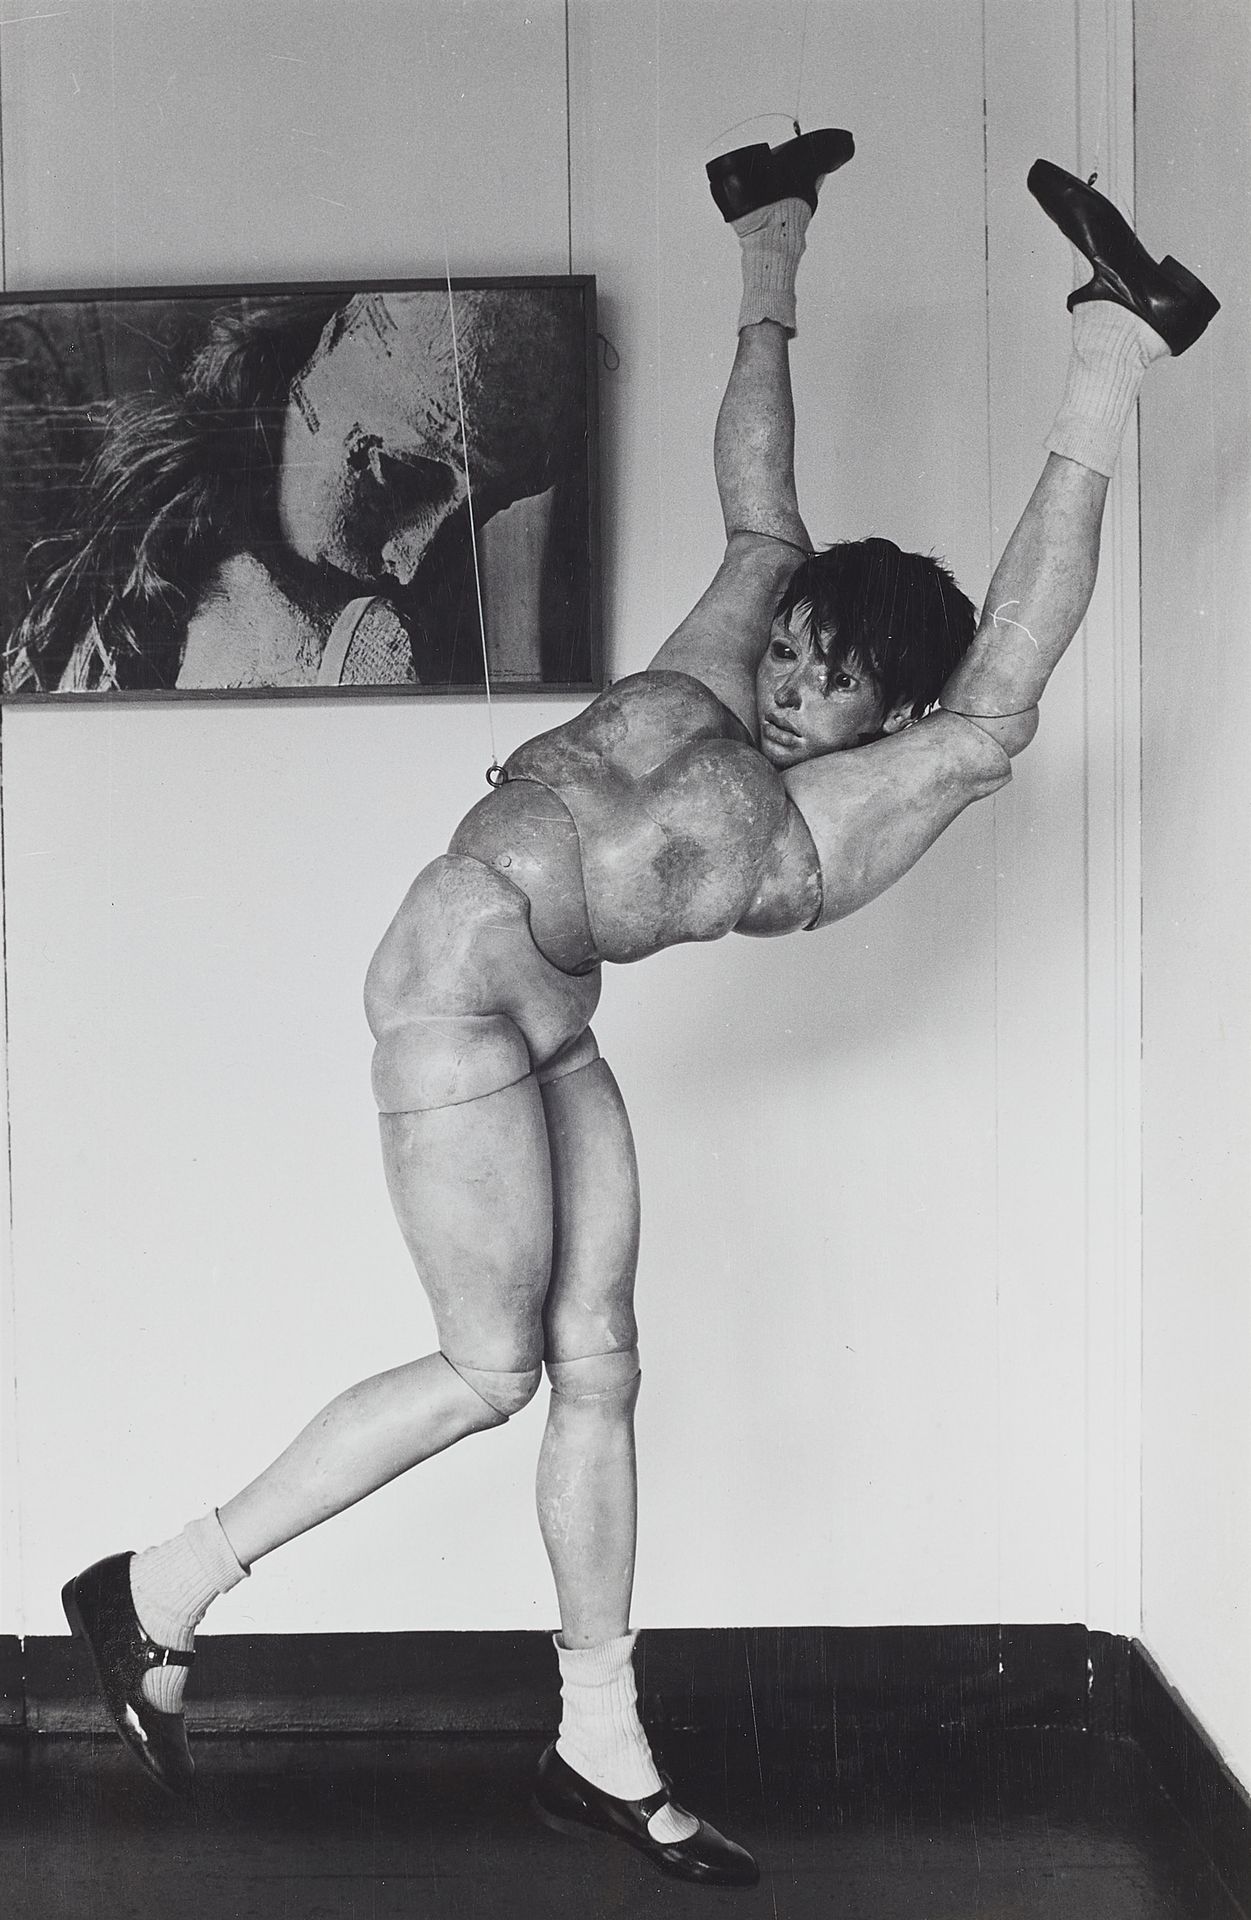 Umbo (Otto Umbehr) Umbo (Otto Umbehr)

Senza titolo (mostra di Hans Bellmer, Han&hellip;